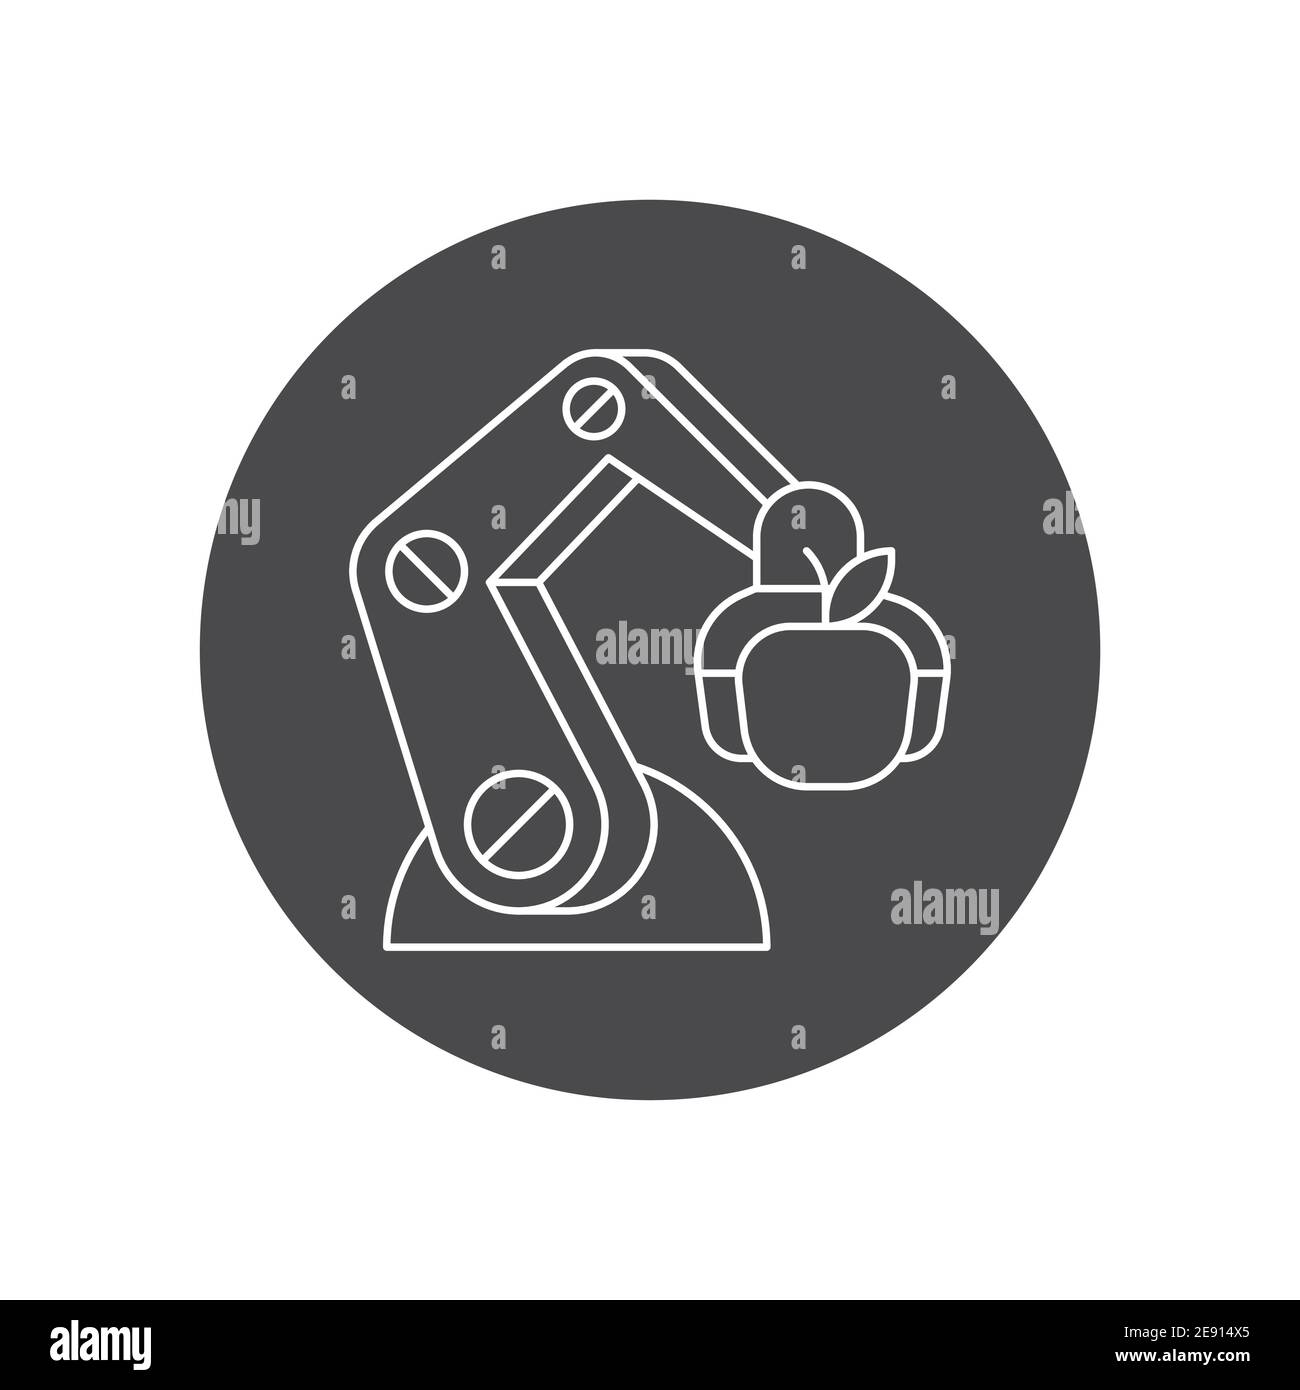 Smart robotic farmers analyze the growth and harvesting plants. Futuristic robot arm automation to increase efficiency black glyph icon. Agricultural Stock Vector